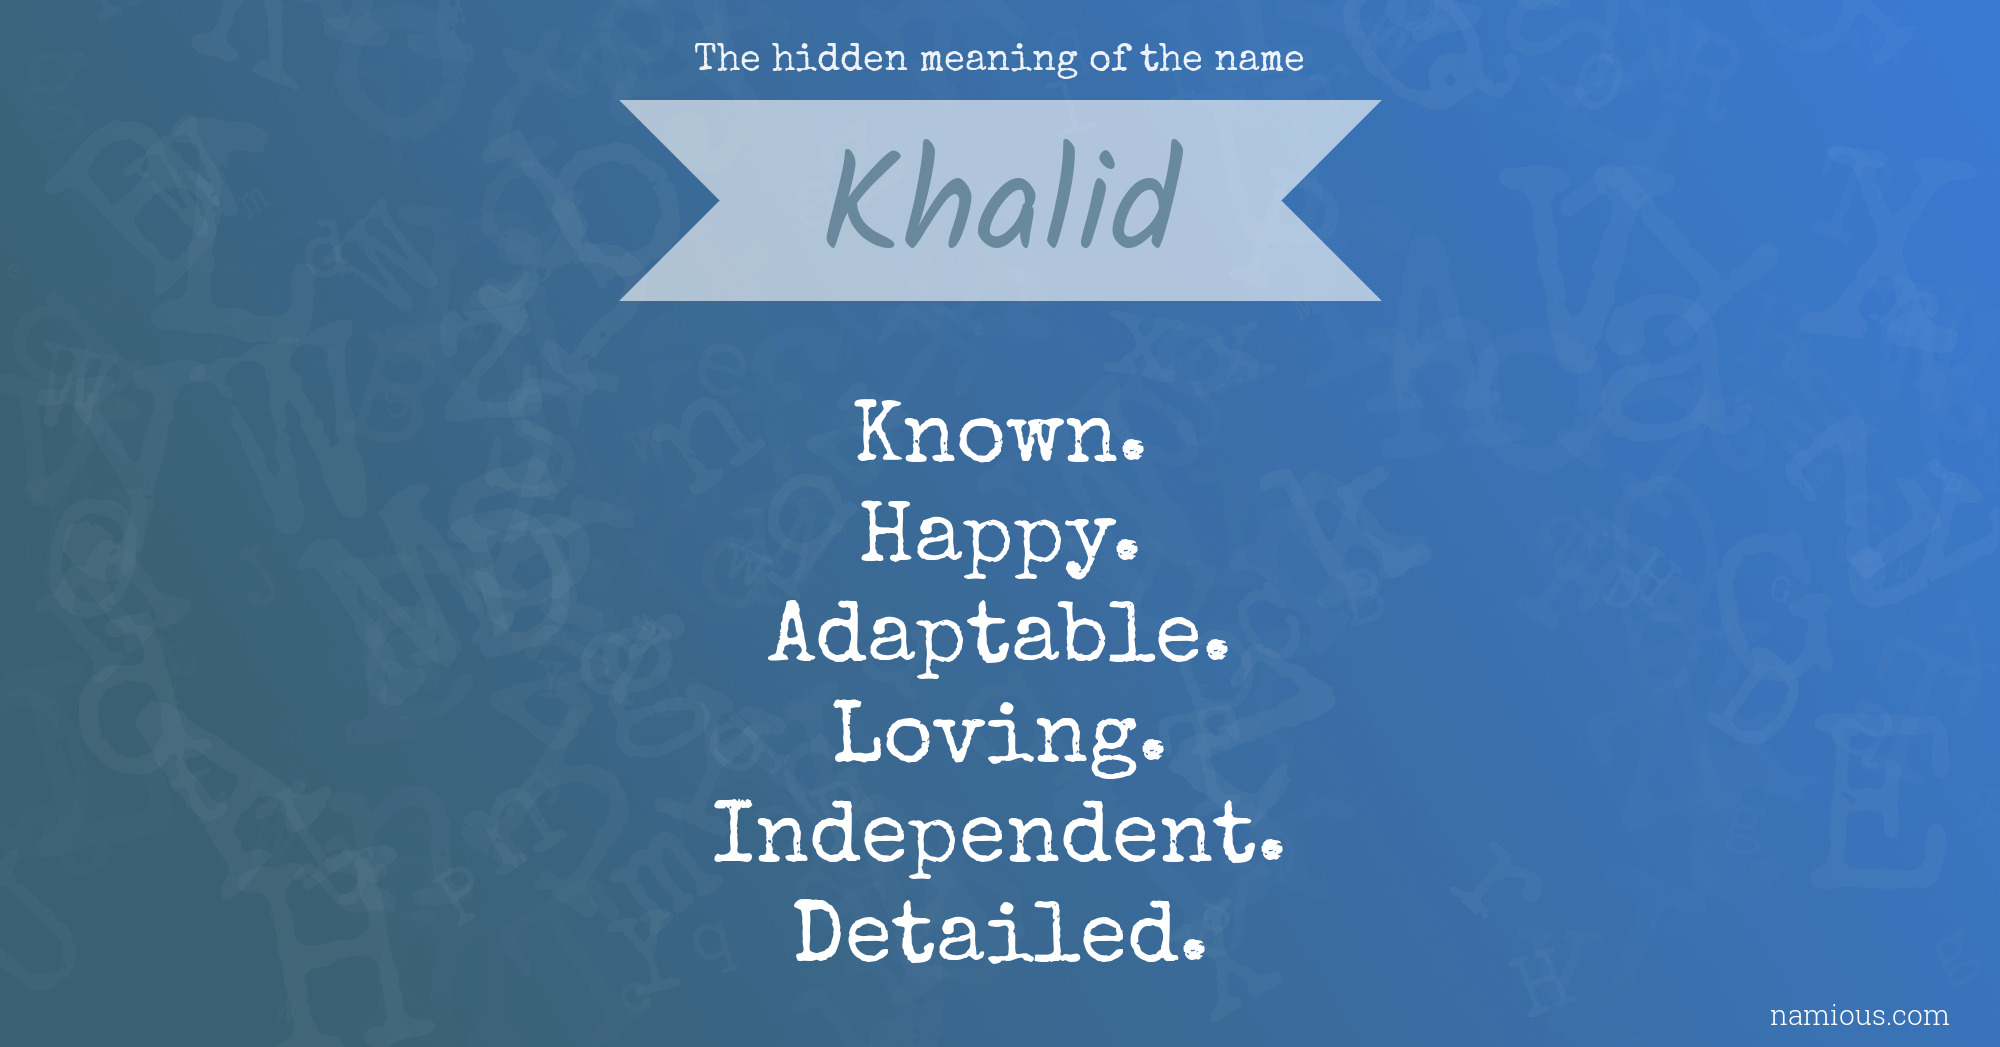 The hidden meaning of the name Khalid